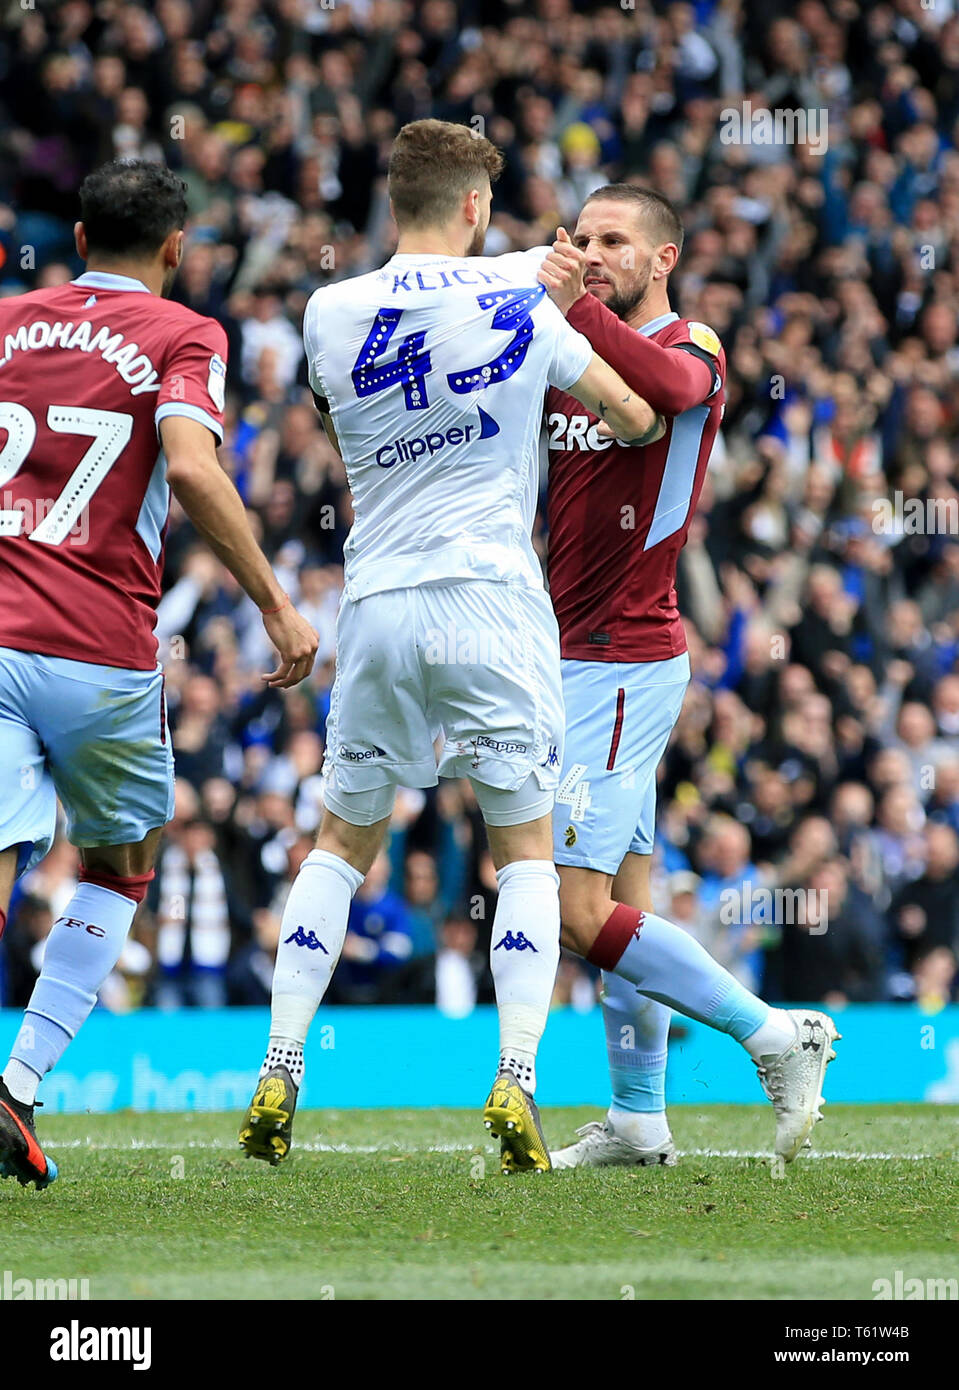 Leeds United's Mateusz Klich is confronted by Aston Villa's Conor Hourihane  after he scores his sides first goal whilst Aston Villa's Jonathan Kodjia  was down injured during the Sky Bet Championship match